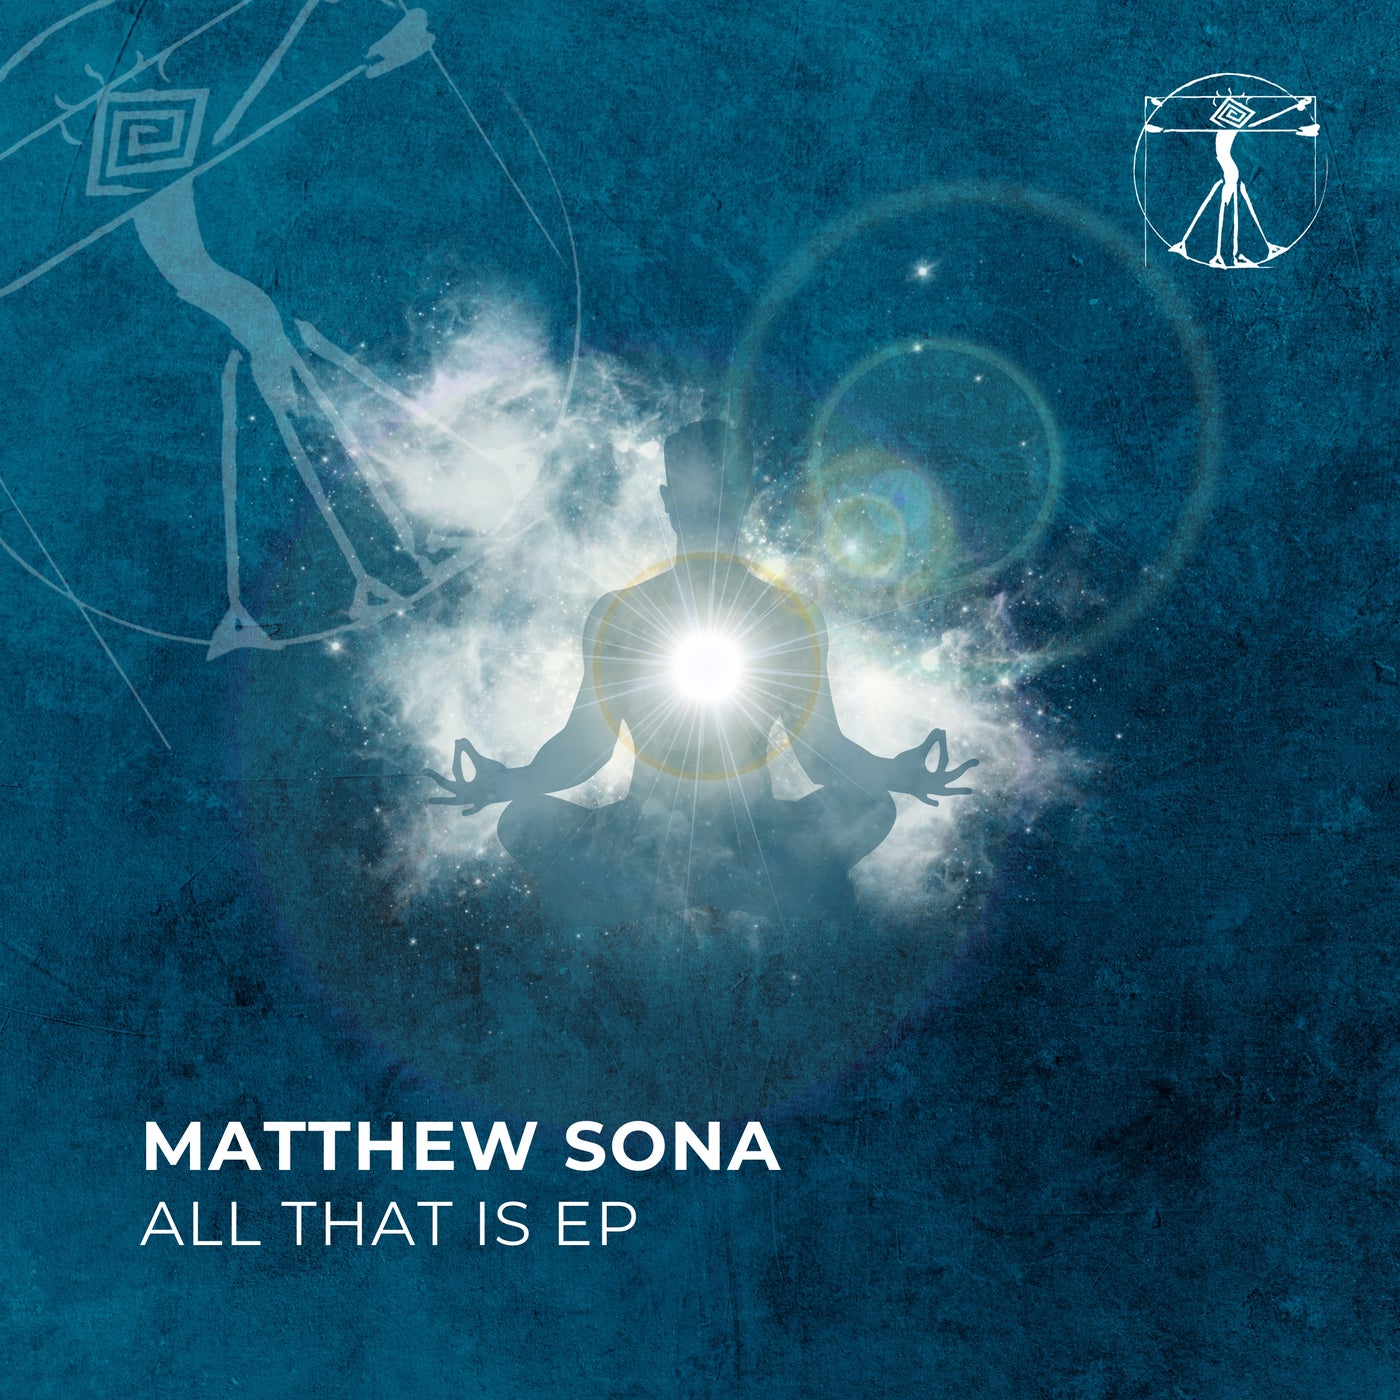 Cover - Matthew Sona - All That Is (Original Mix)